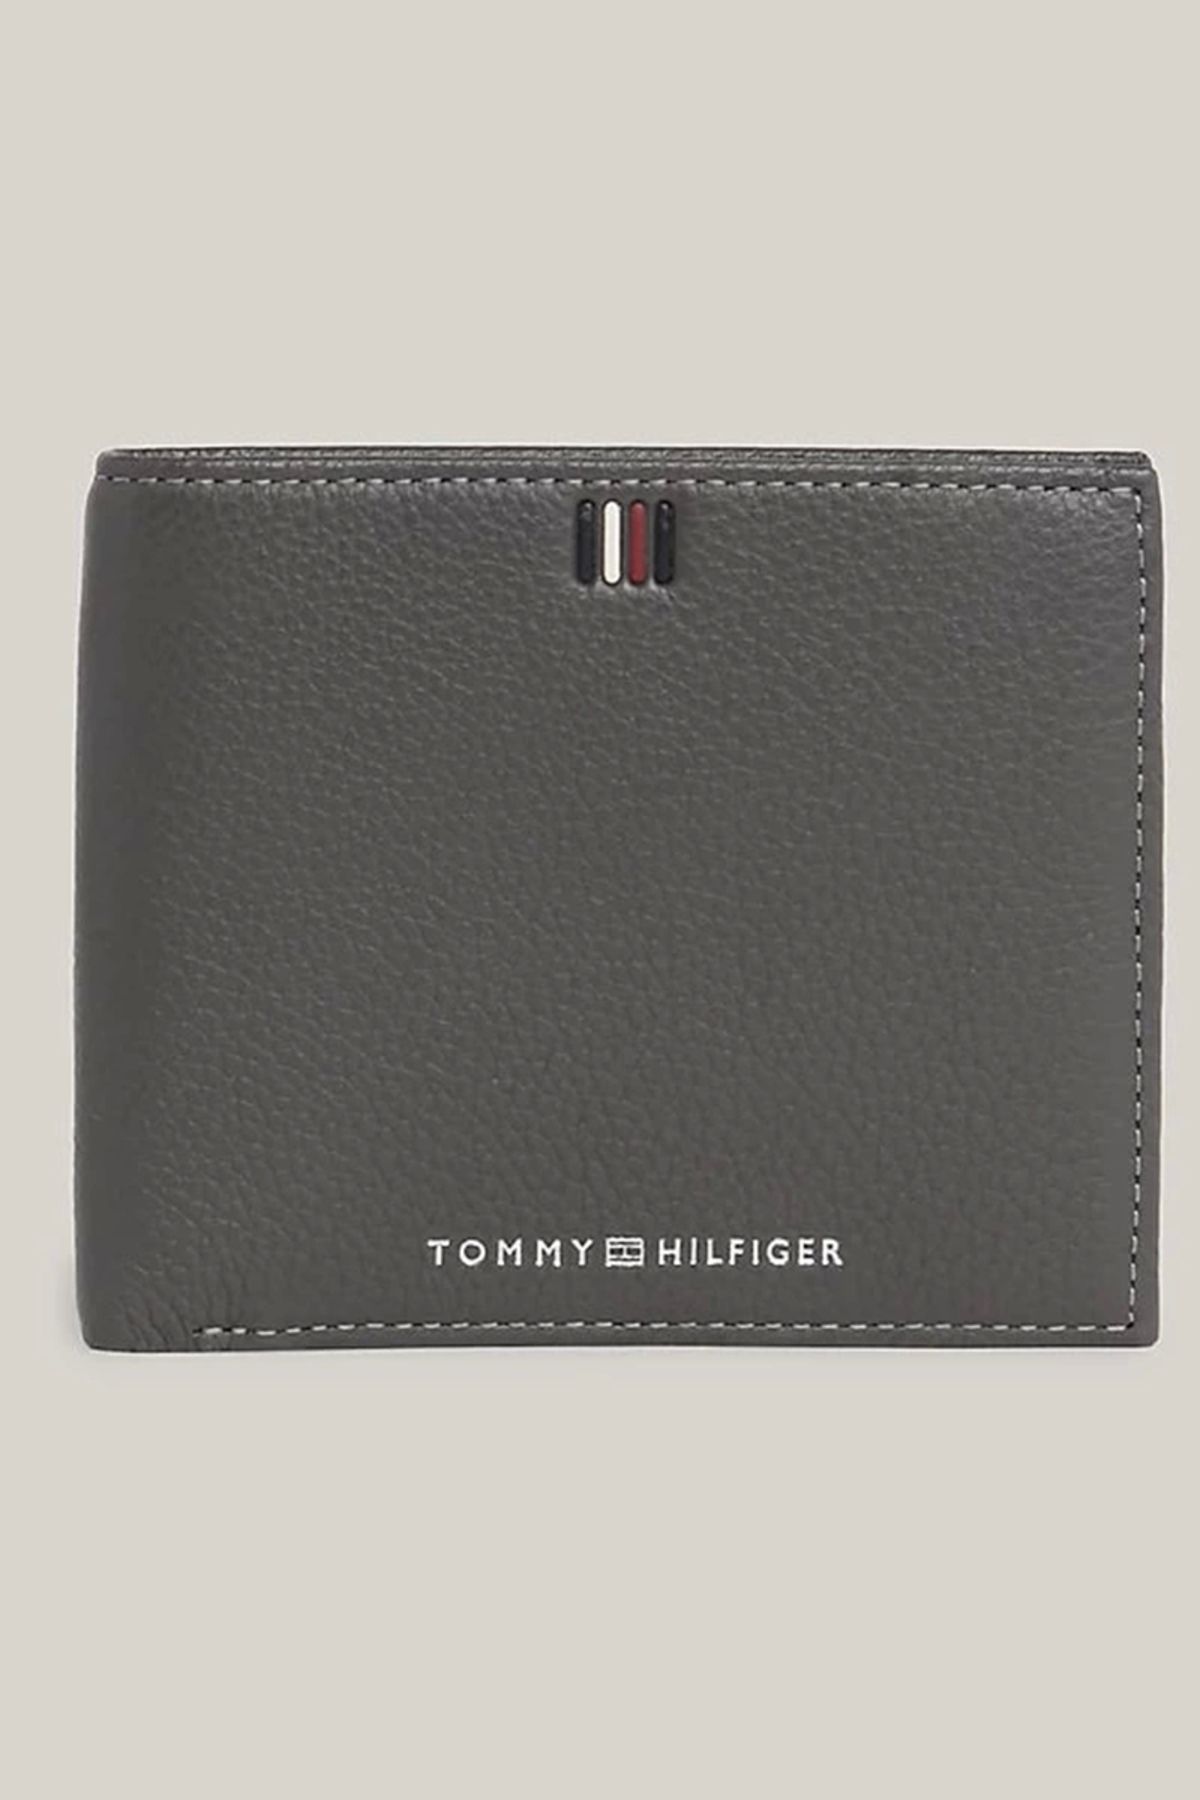 Tommy Hilfiger TH CENTRAL CC AND COIN